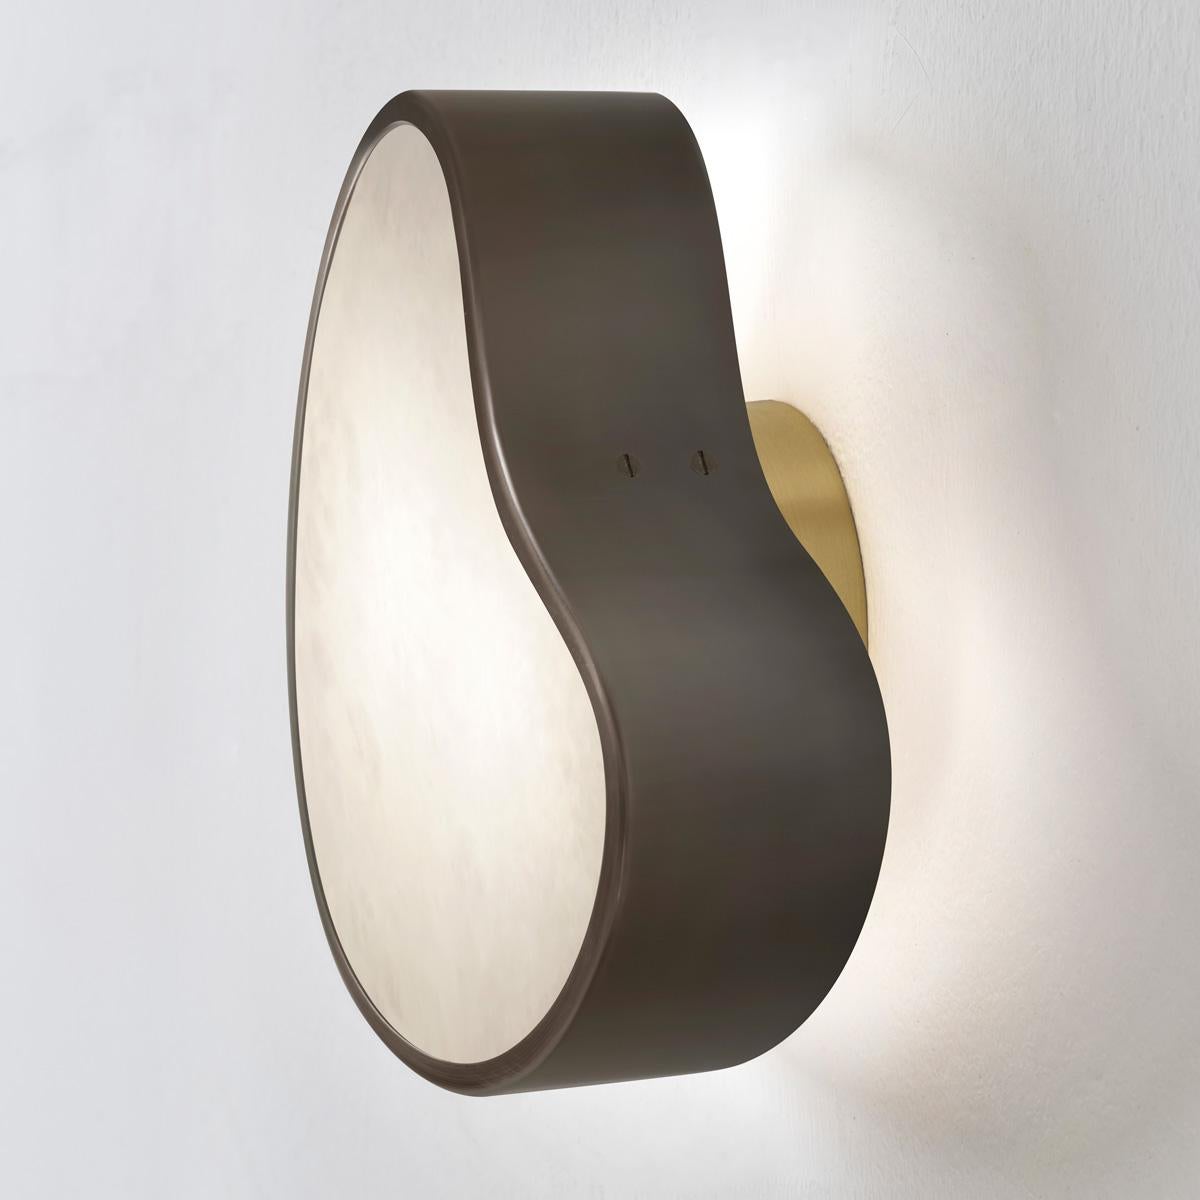 Brass Cuore Wall Light by Gaspare Asaro. Alabaster Version For Sale